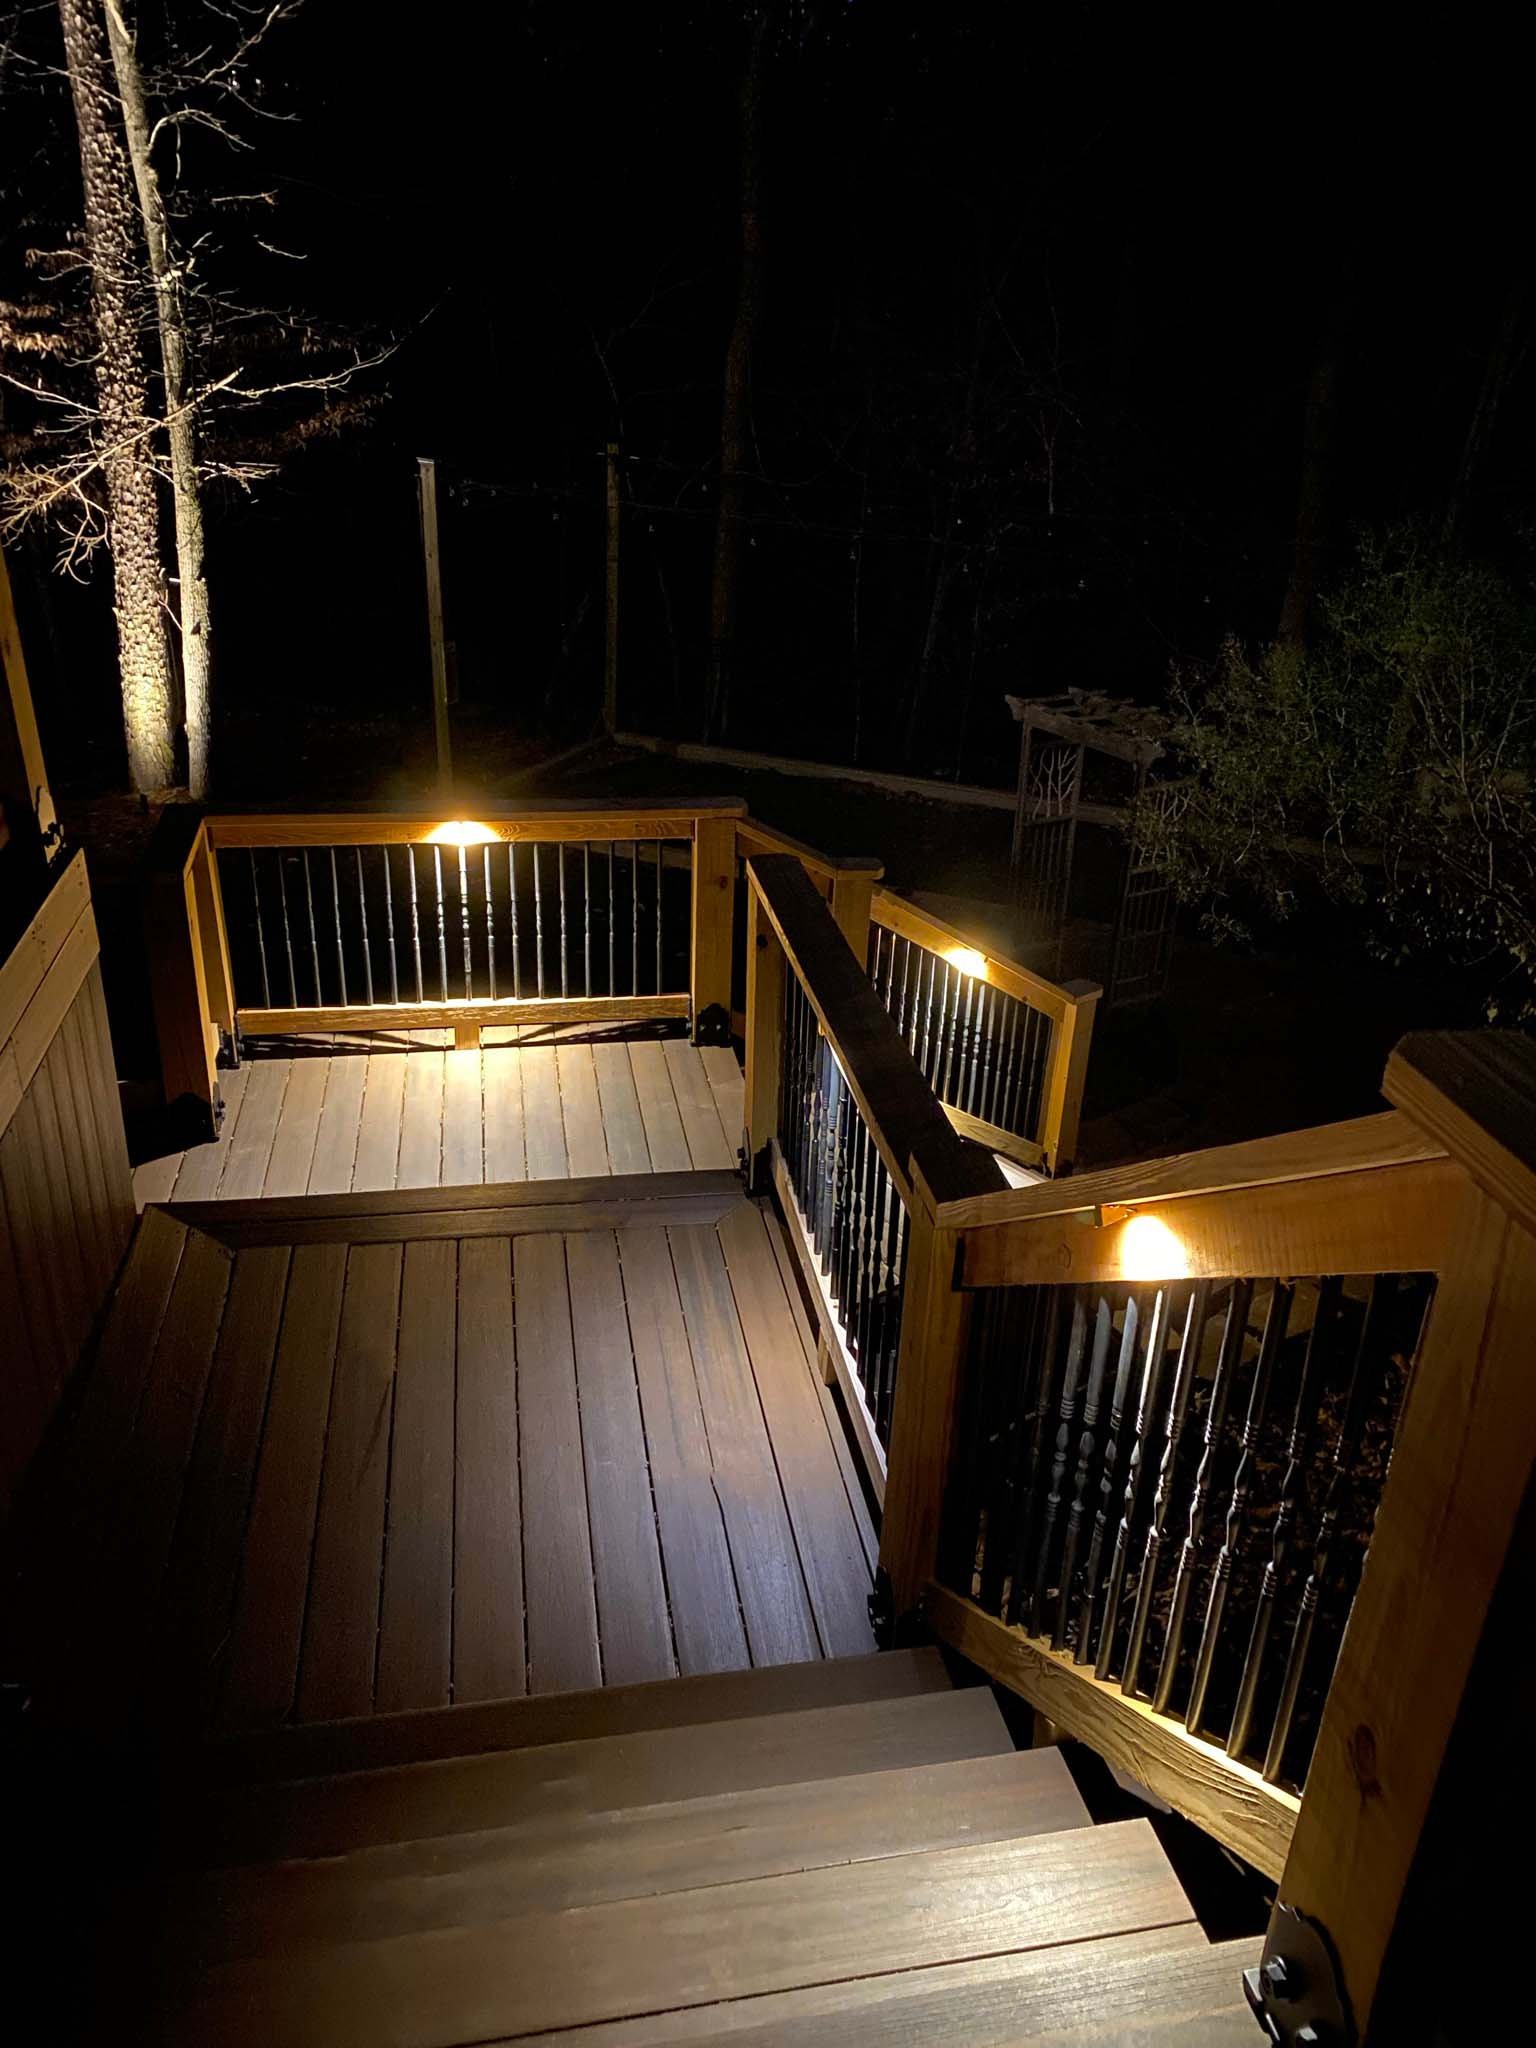  Deck and stairway illuminated with deck lighting mounted under the railings.  